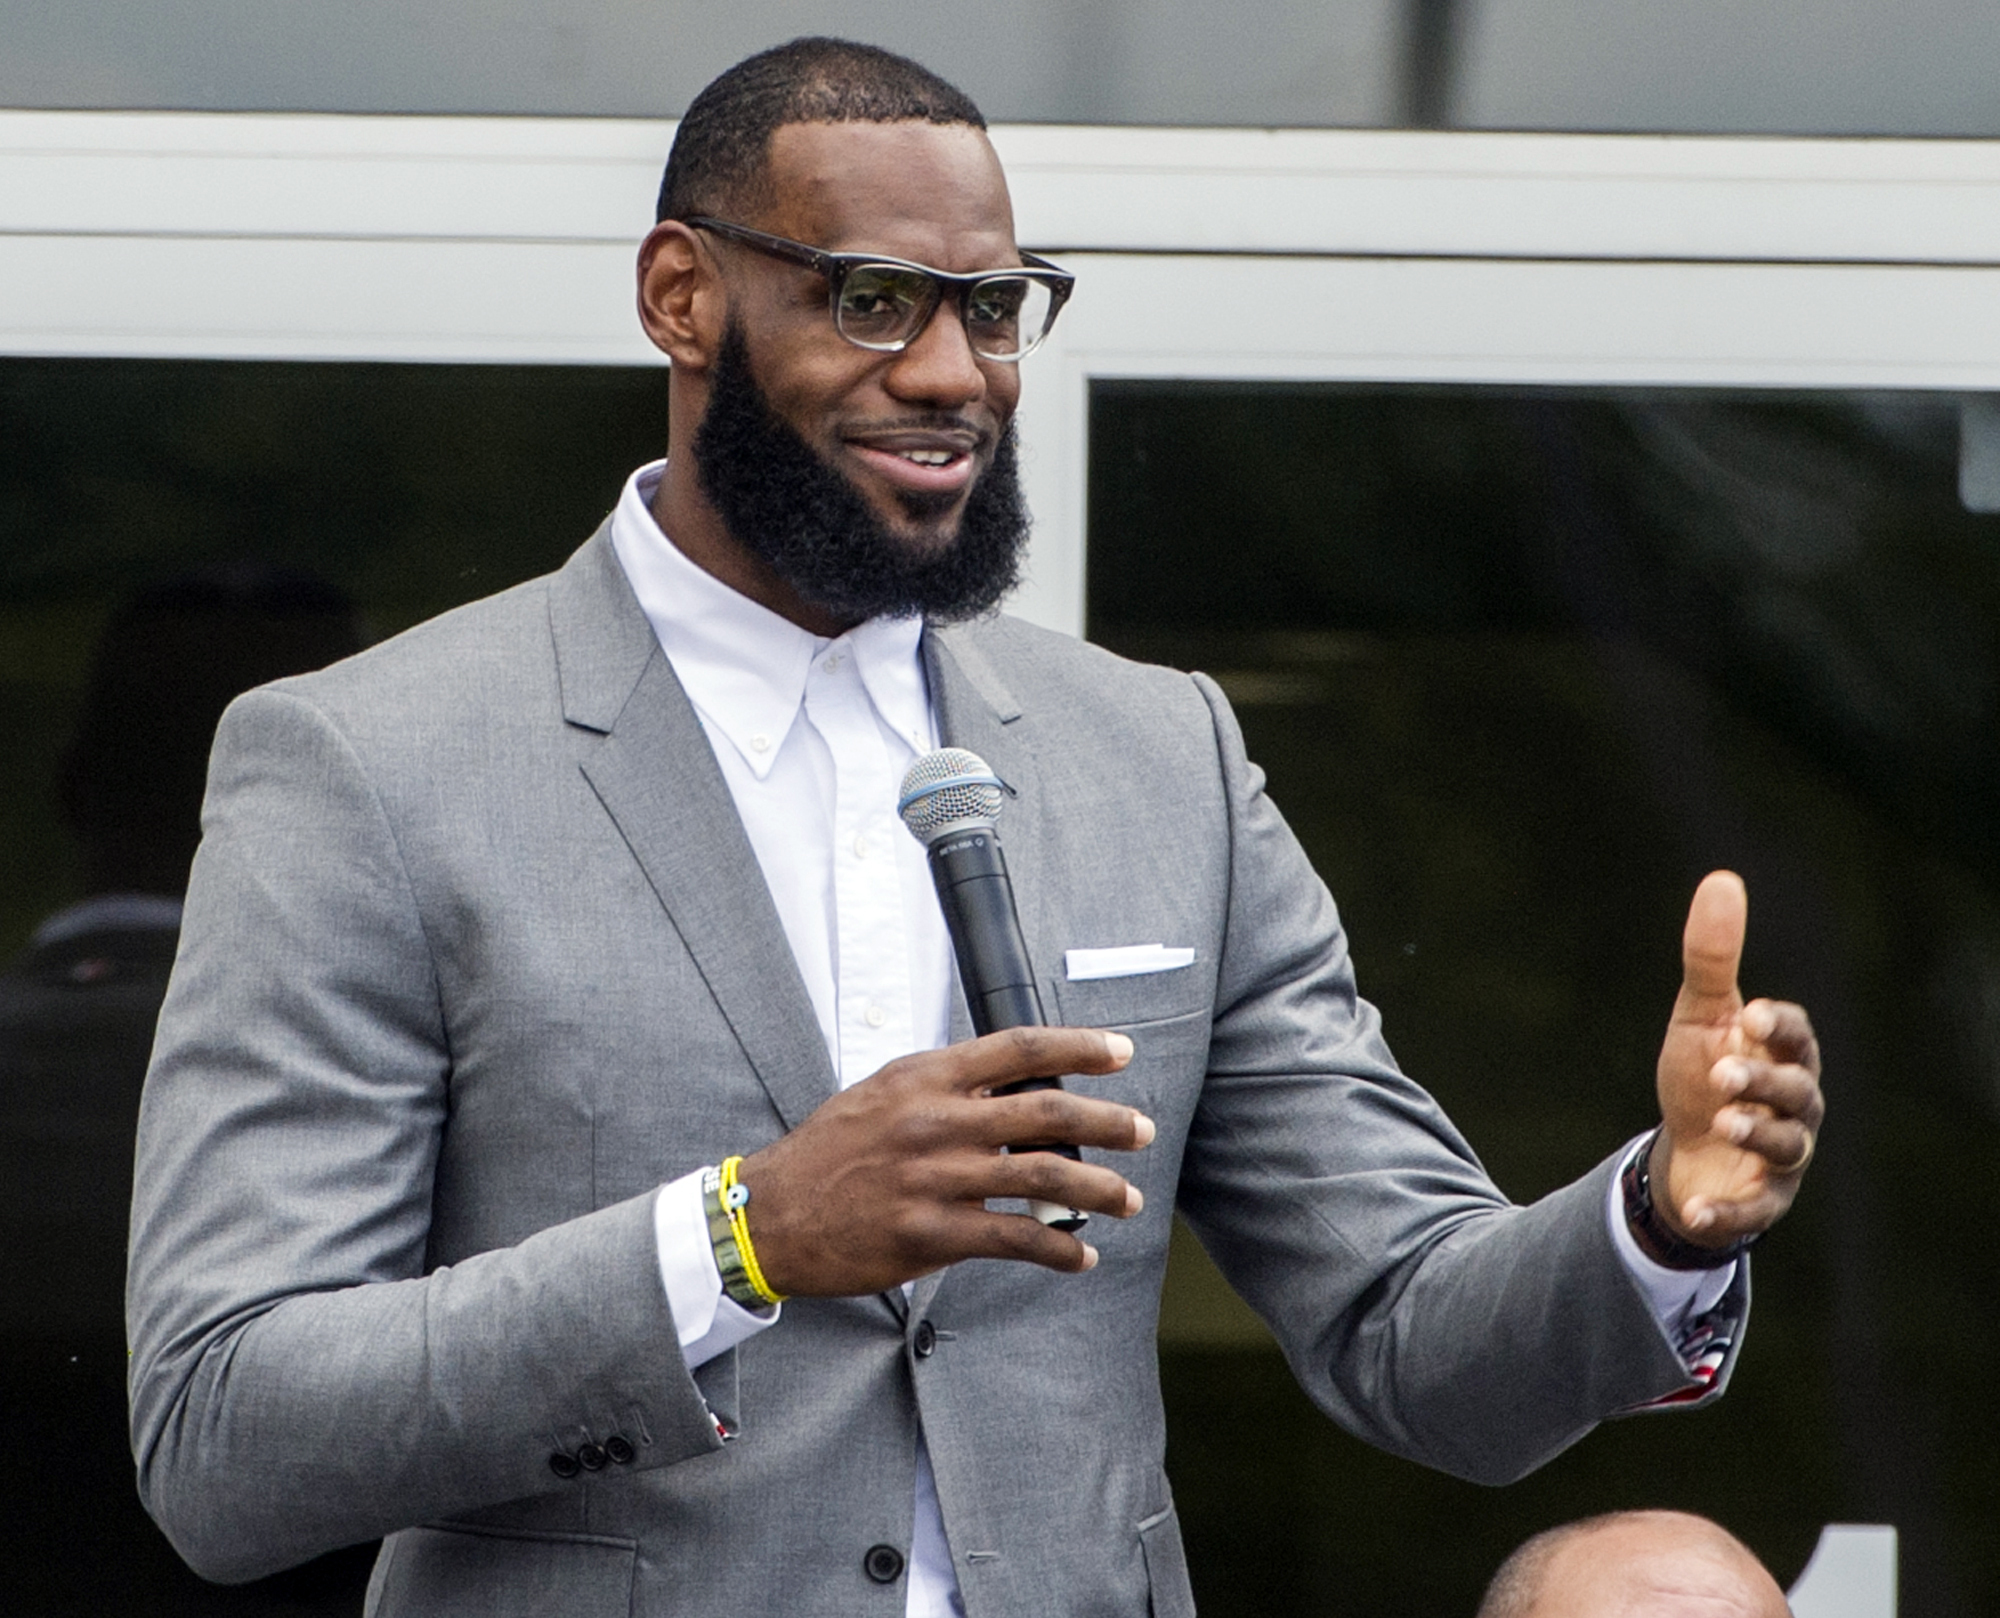 Lakers Star LeBron James Is Now Part-Owner of the Red Sox - InsideHook